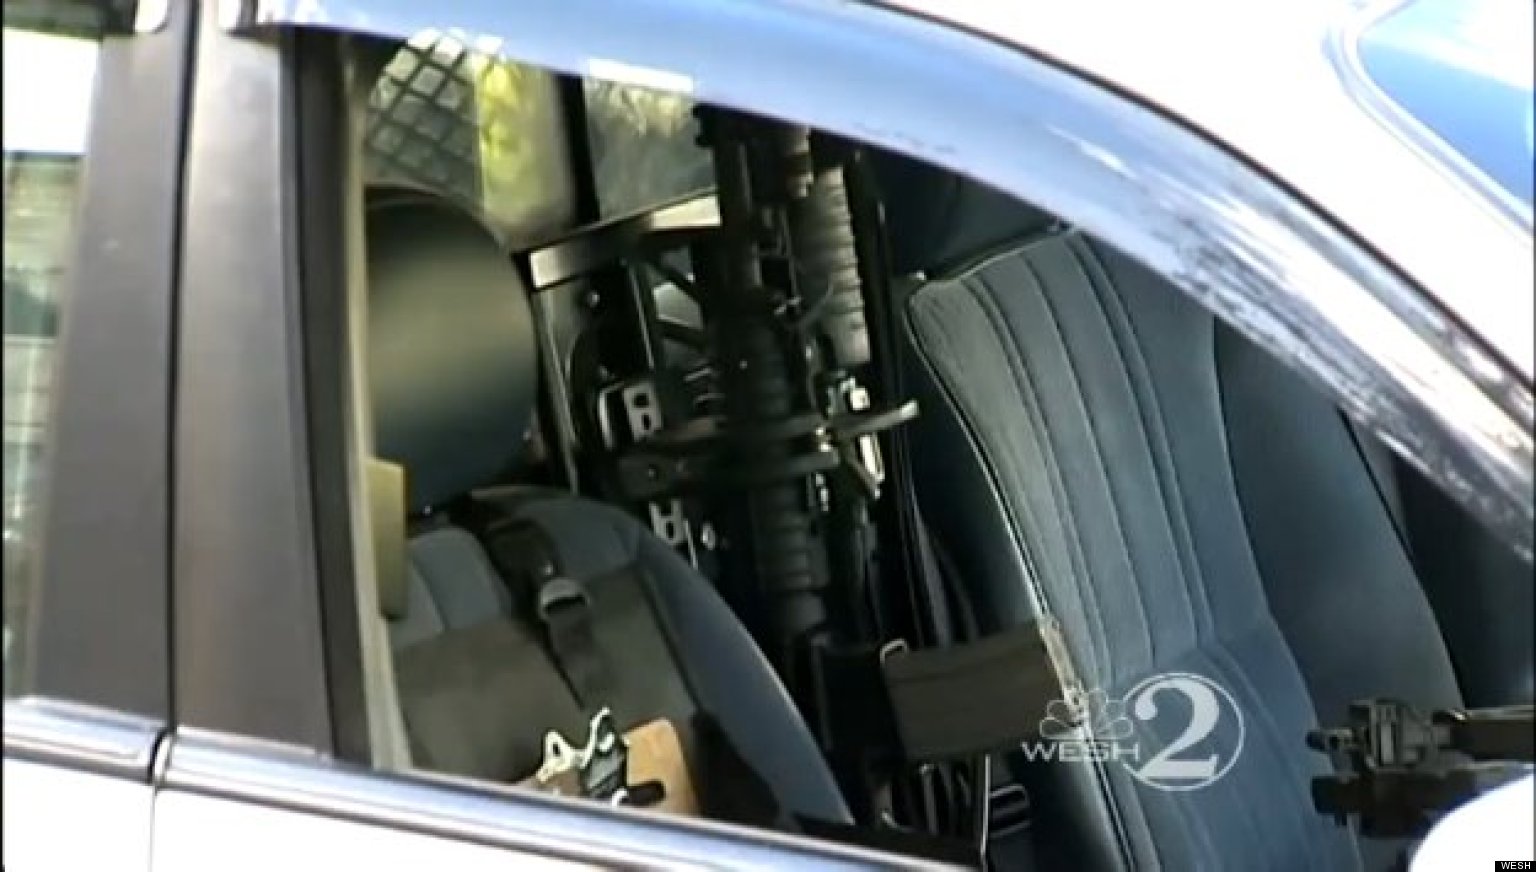 Cop Leaves Loaded AR-15 Semi-Automatic Rifle In Police Car Parked With Window Open (VIDEO)1536 x 872